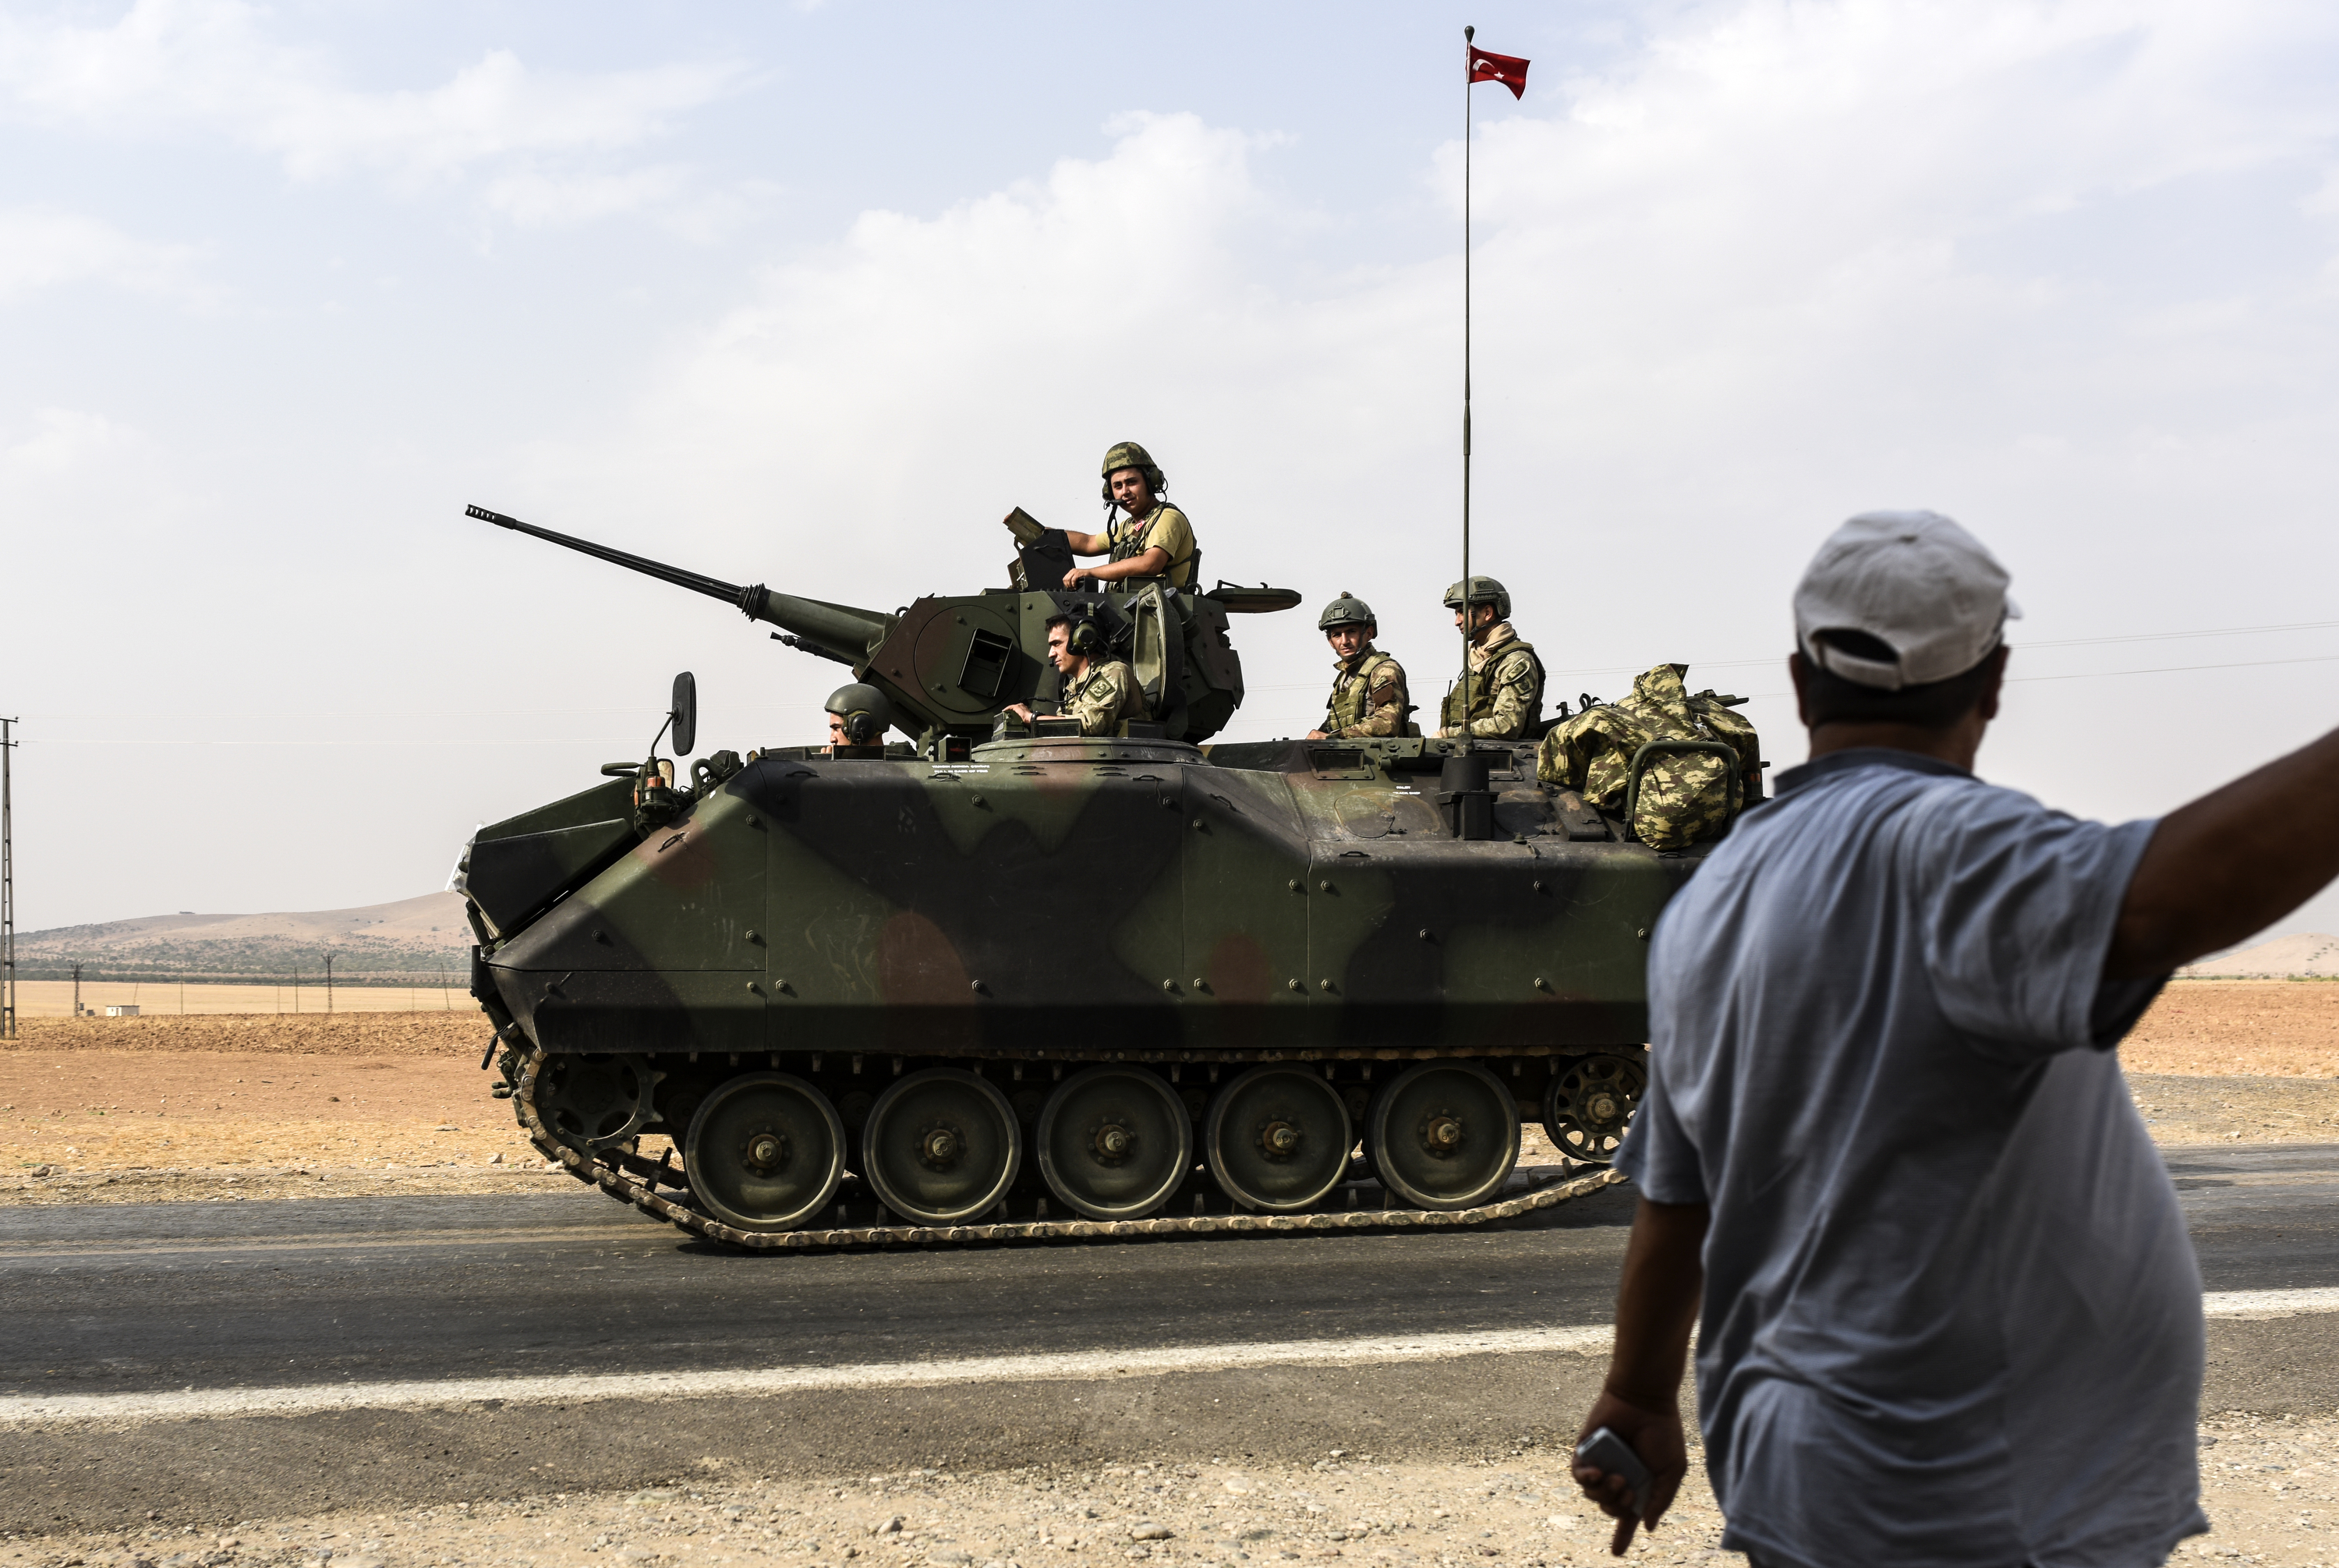 A Turkish man stands as a Turkish tank convoy drives to Syria from the Turkish Syrian border city of Karkamis in the southern region of Gaziantep, on August 26, 2016.  Turkey shelled Kurdish militia fighters in Syria on August 26 on the second day of a major military operation inside the country, saying they were failing to observe a deal with the US to stop advancing in jihadist-held territory. Turkey's army backed by international coalition air strikes launched an operation involving fighter jets and elite ground troops to drive Islamic State jihadists out of the border area. / AFP PHOTO / BULENT KILIC